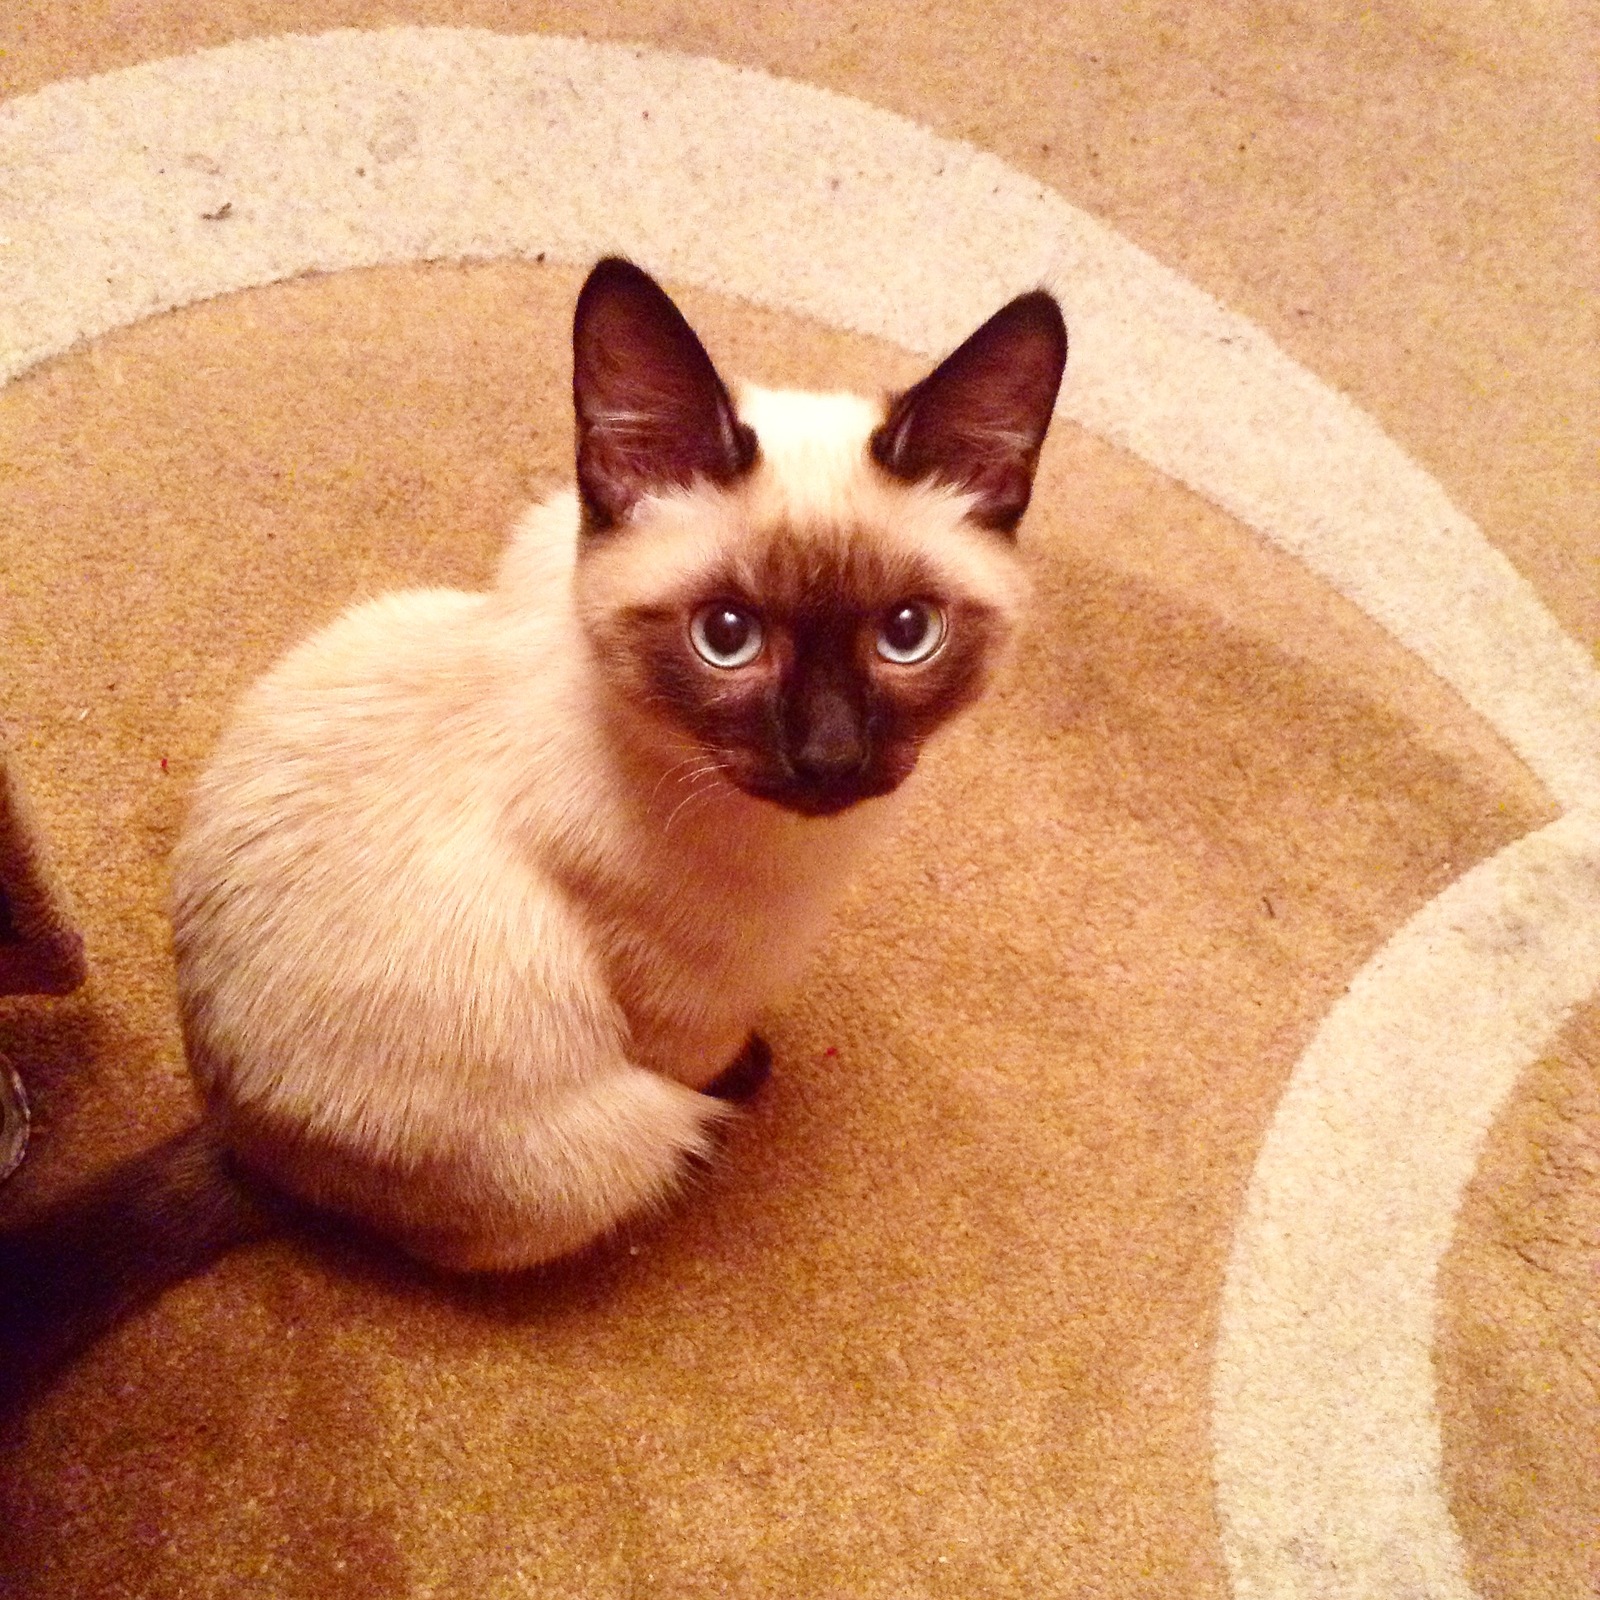 A Siamese Cat sitting on the floor while staring